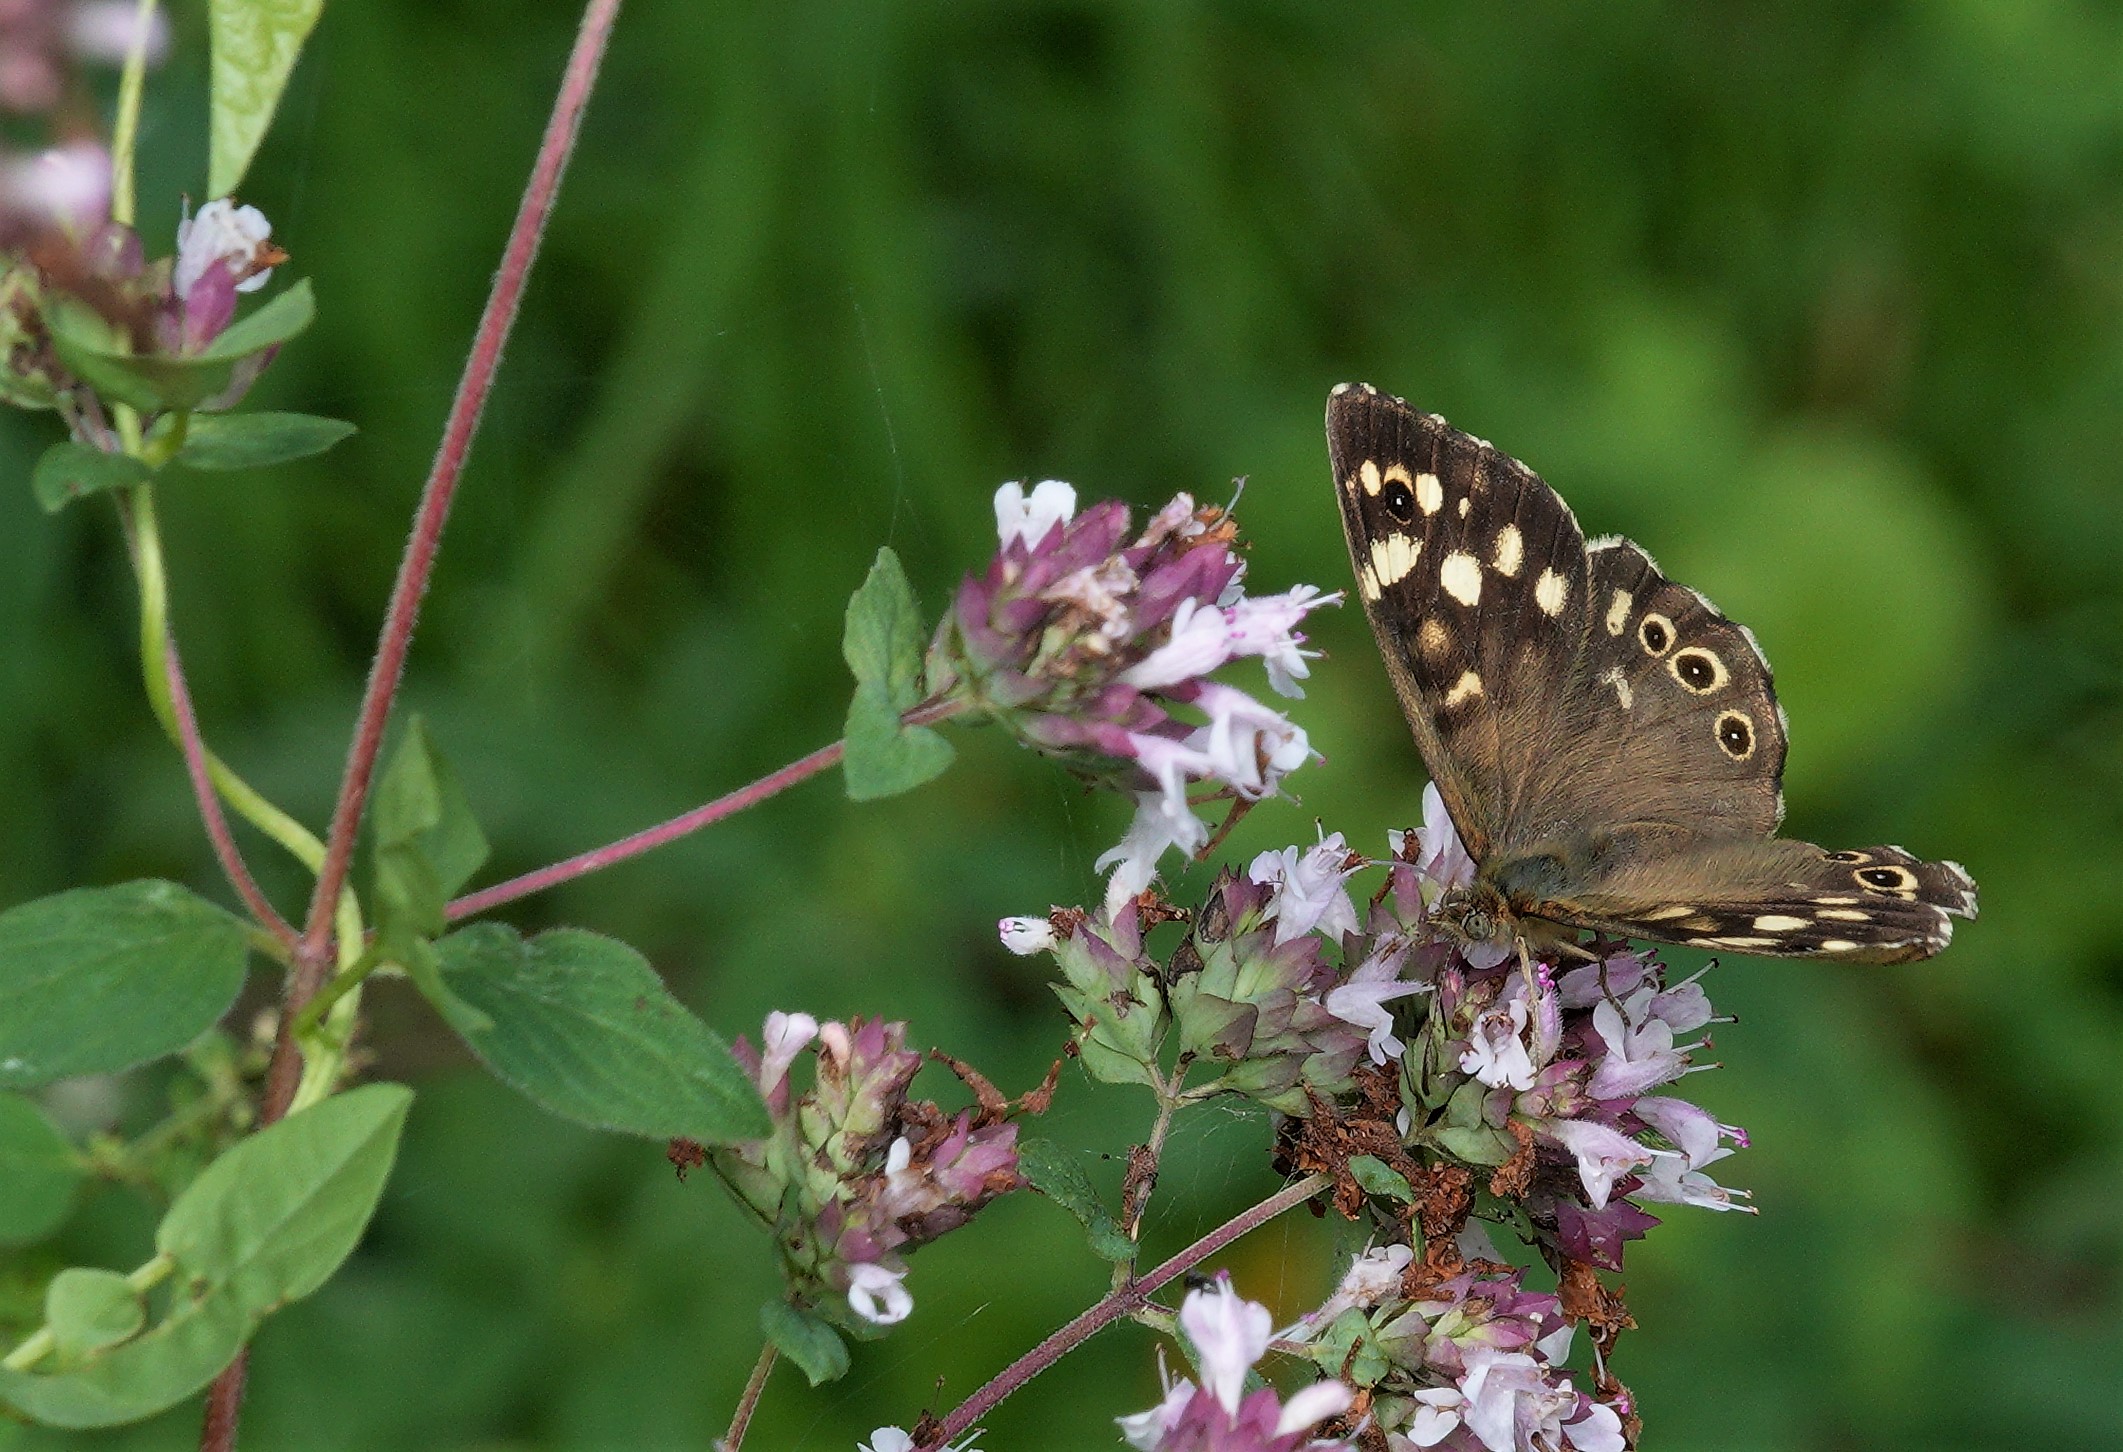 Butterfly of the year - the SPECKLED WOOD. In greater numbers than ever before and truly at home throughout the garden.